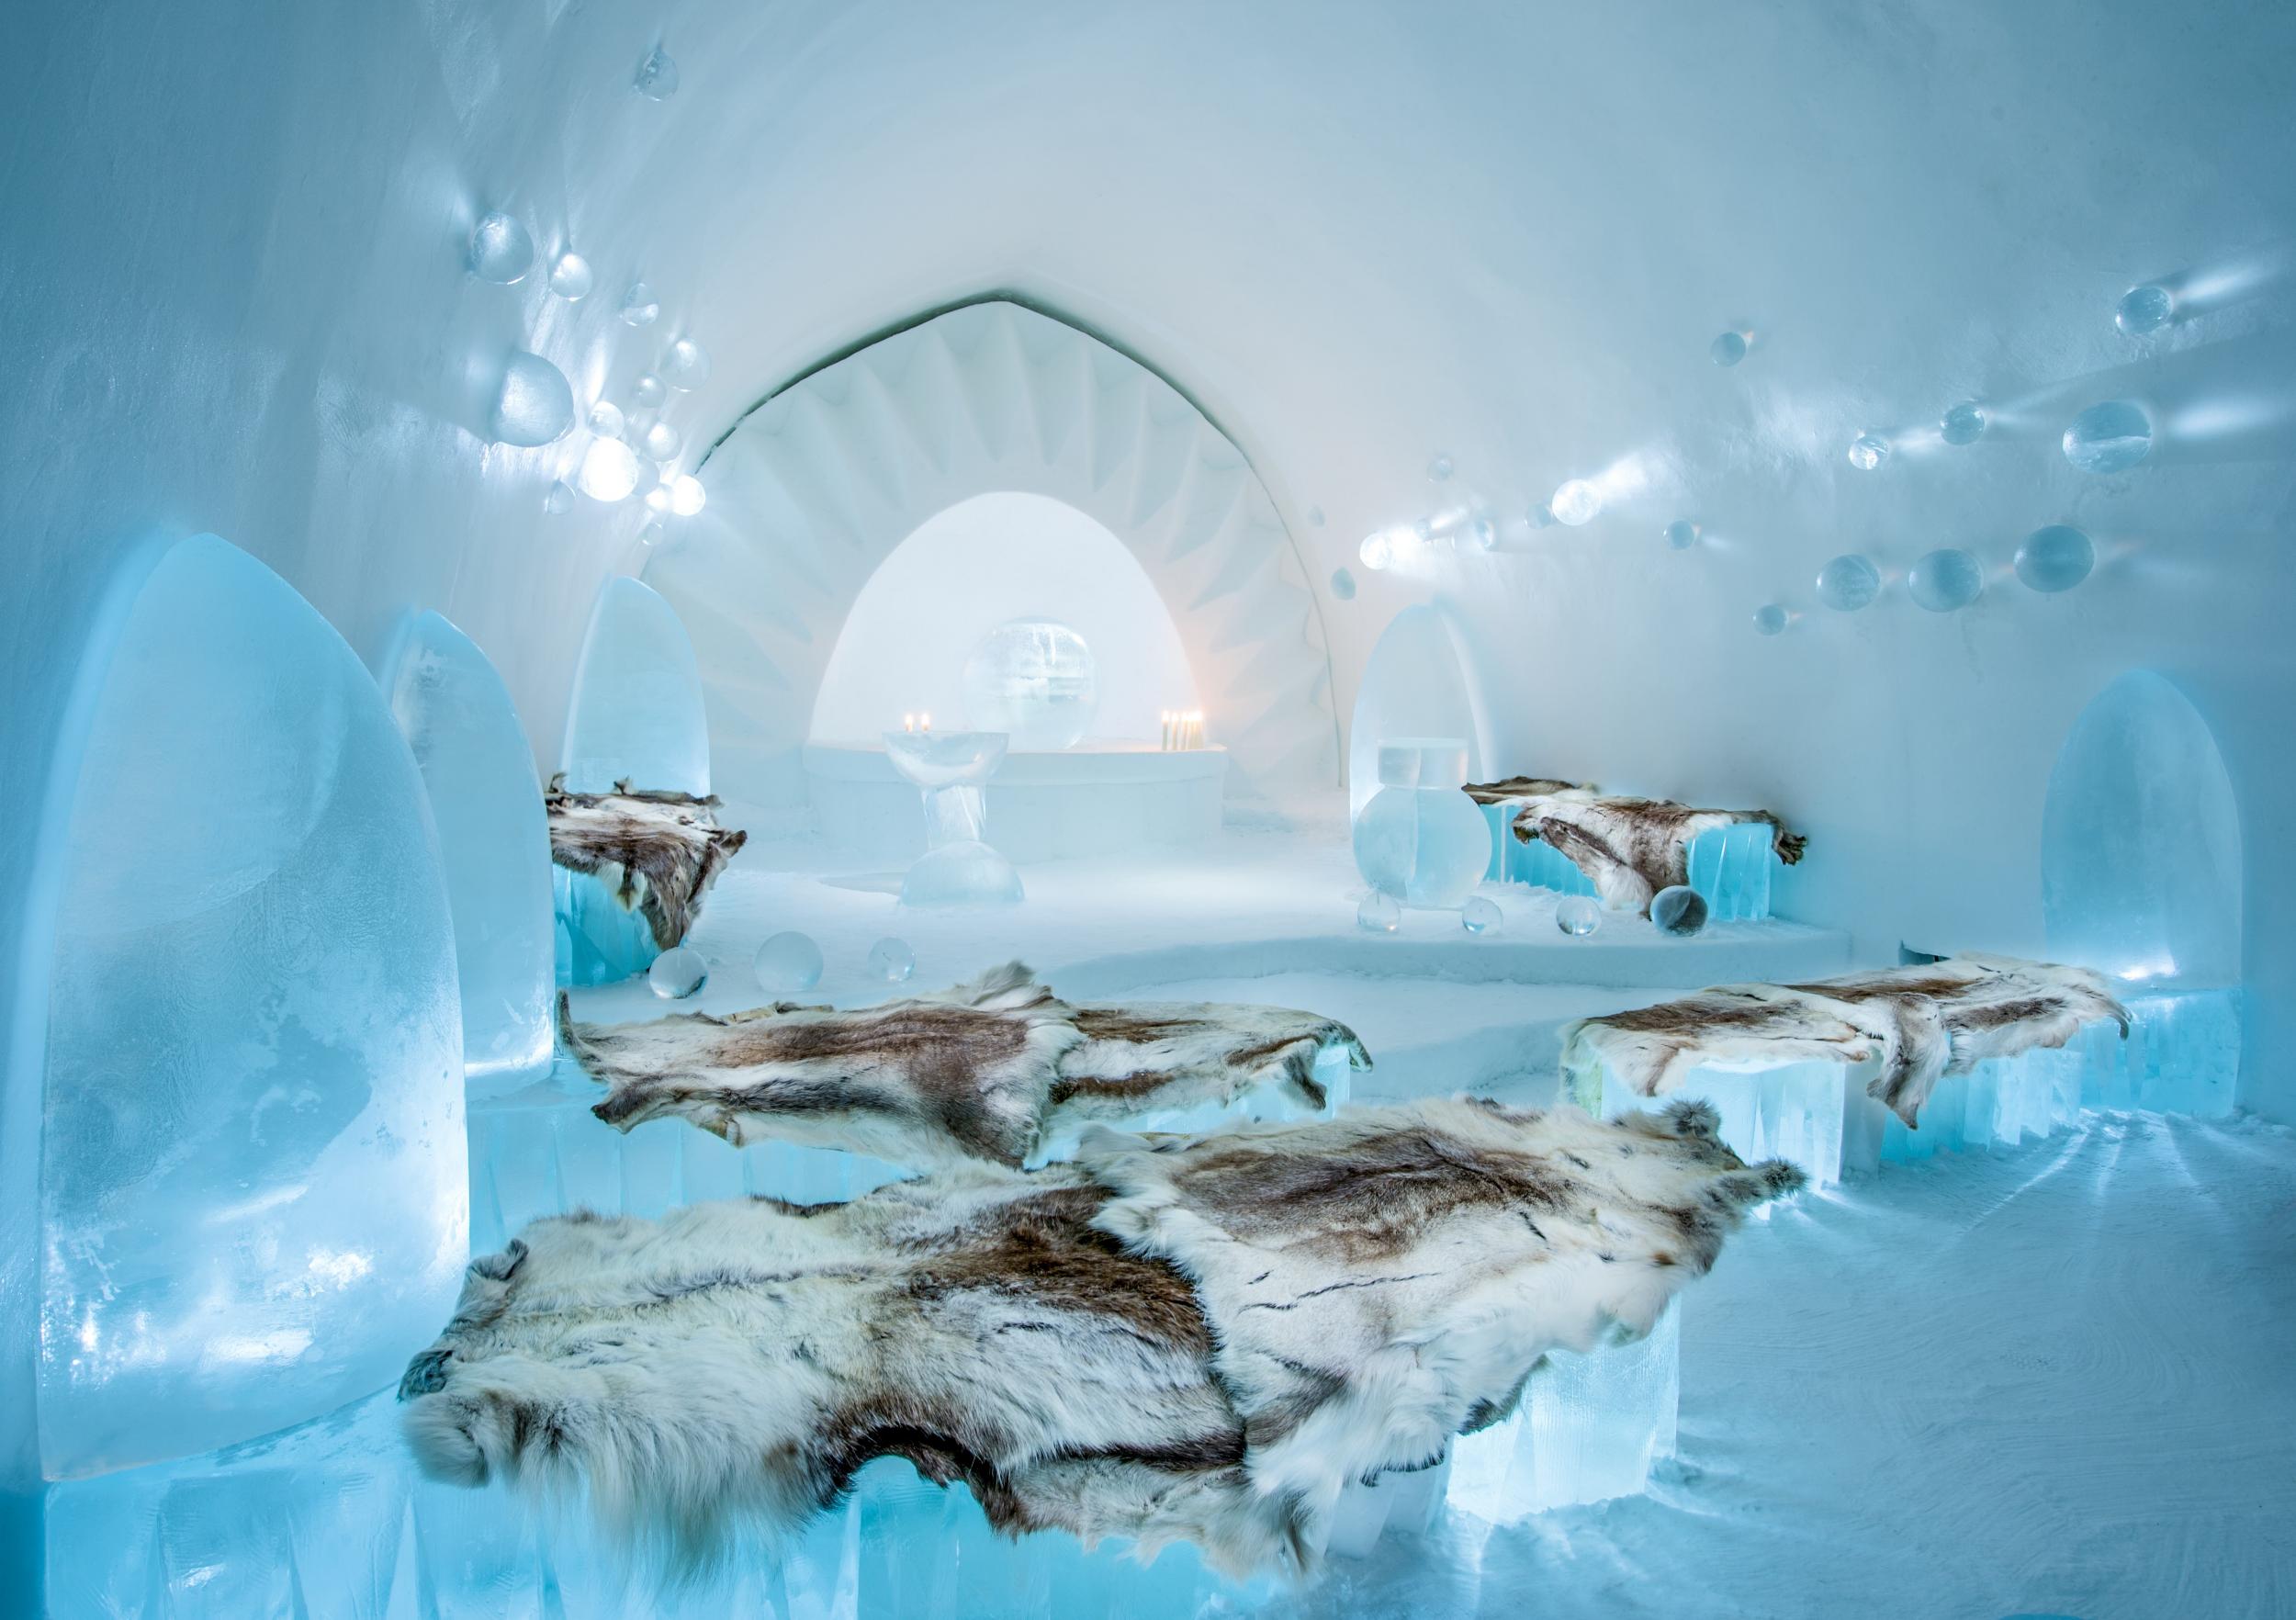 This year’s Ice Hotel opens on 14 December